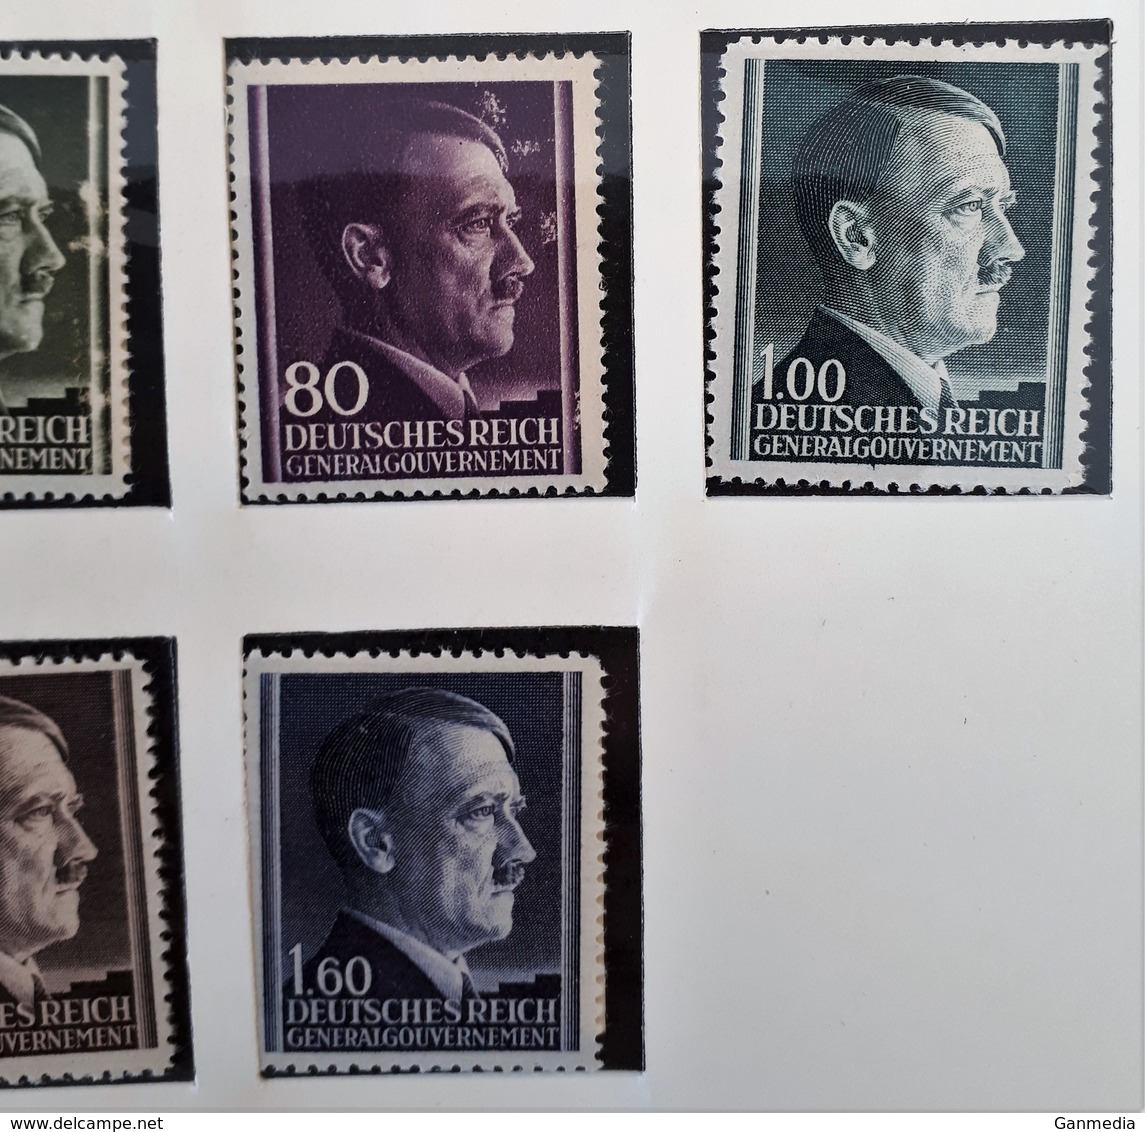 Poland - Occupation Stamps 1940/42 (General Gouvernement)